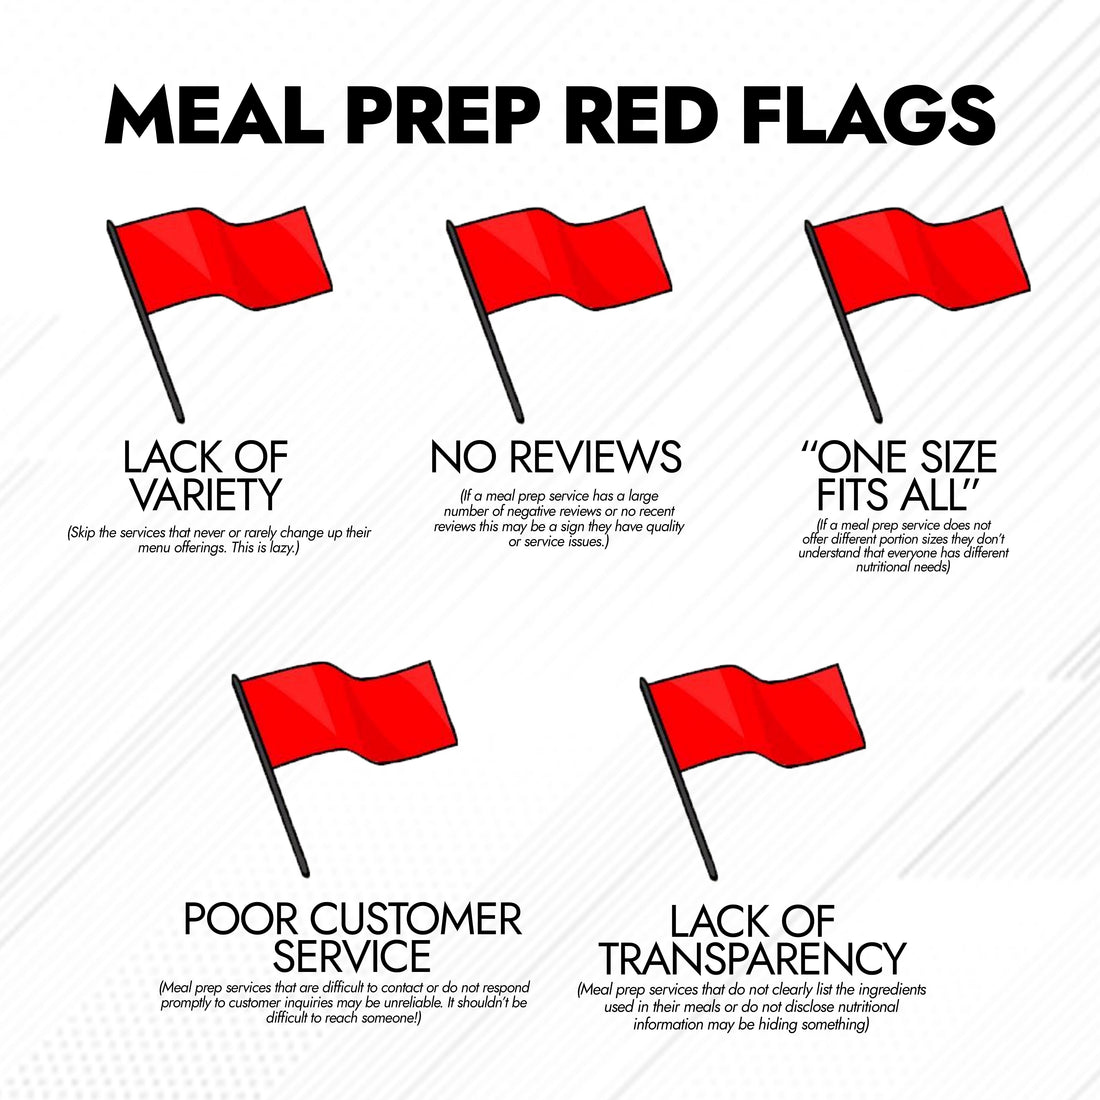 Watch Out For These 5 Meal Prep Service Red Flags!